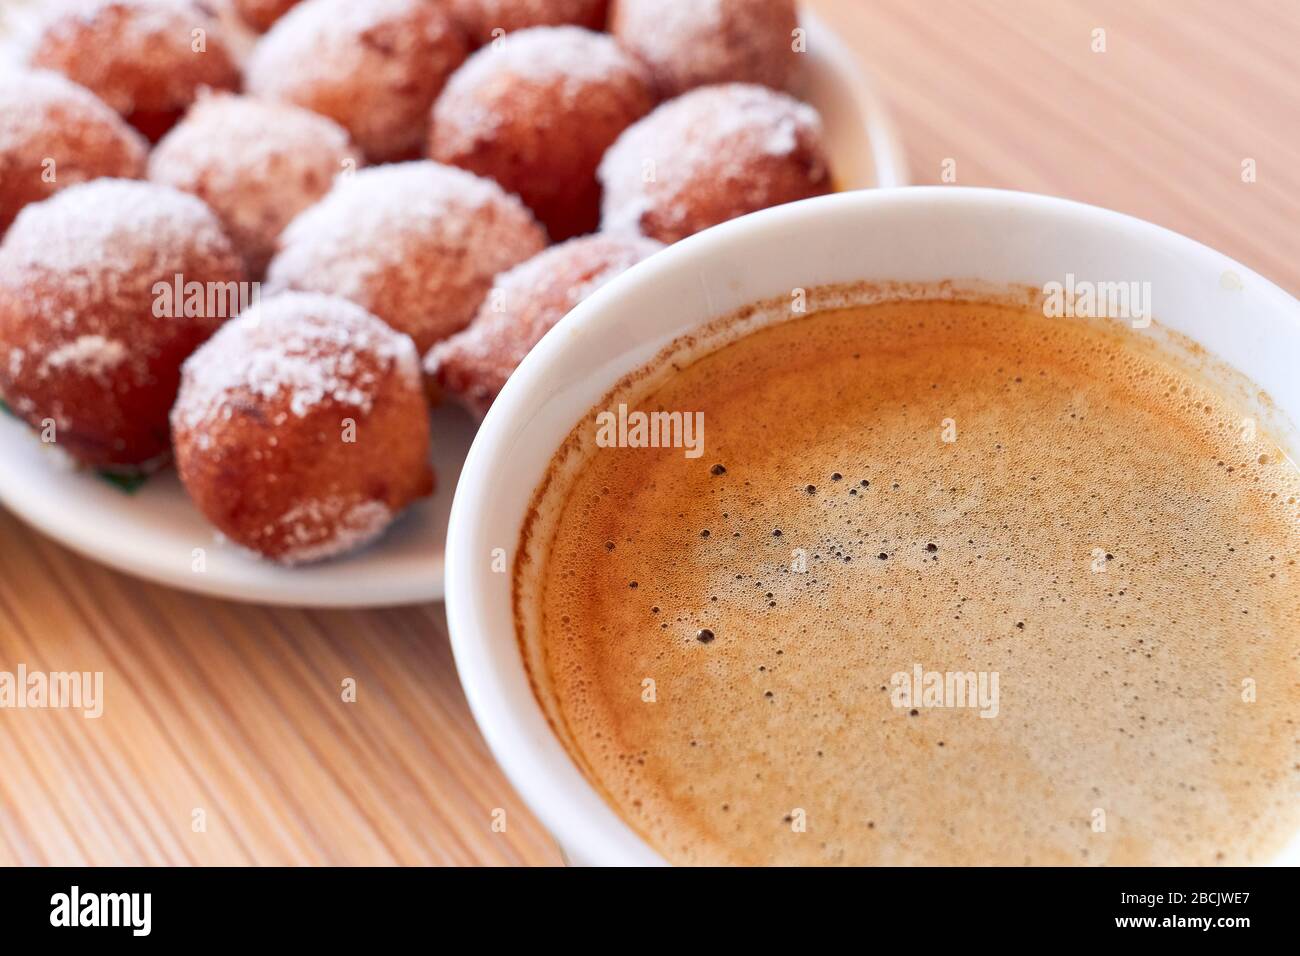 Starting morning with a coffee and homemade donut holes during pandemic isolation Stock Photo